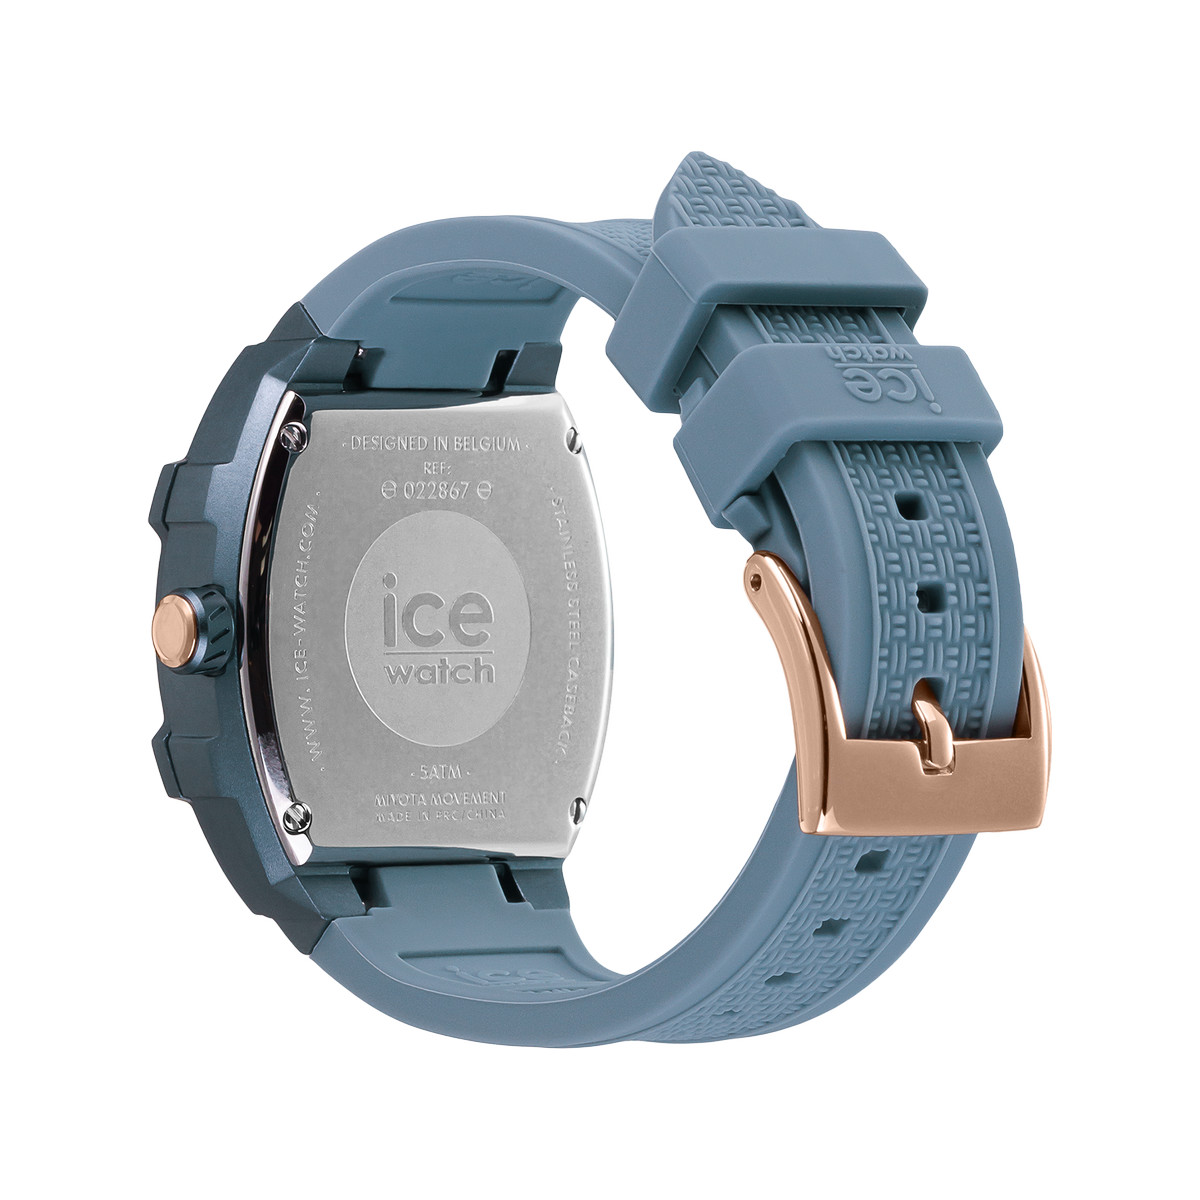 Montre ICE WATCH Ice boliday femme bracelet silicone bleu - vue 3